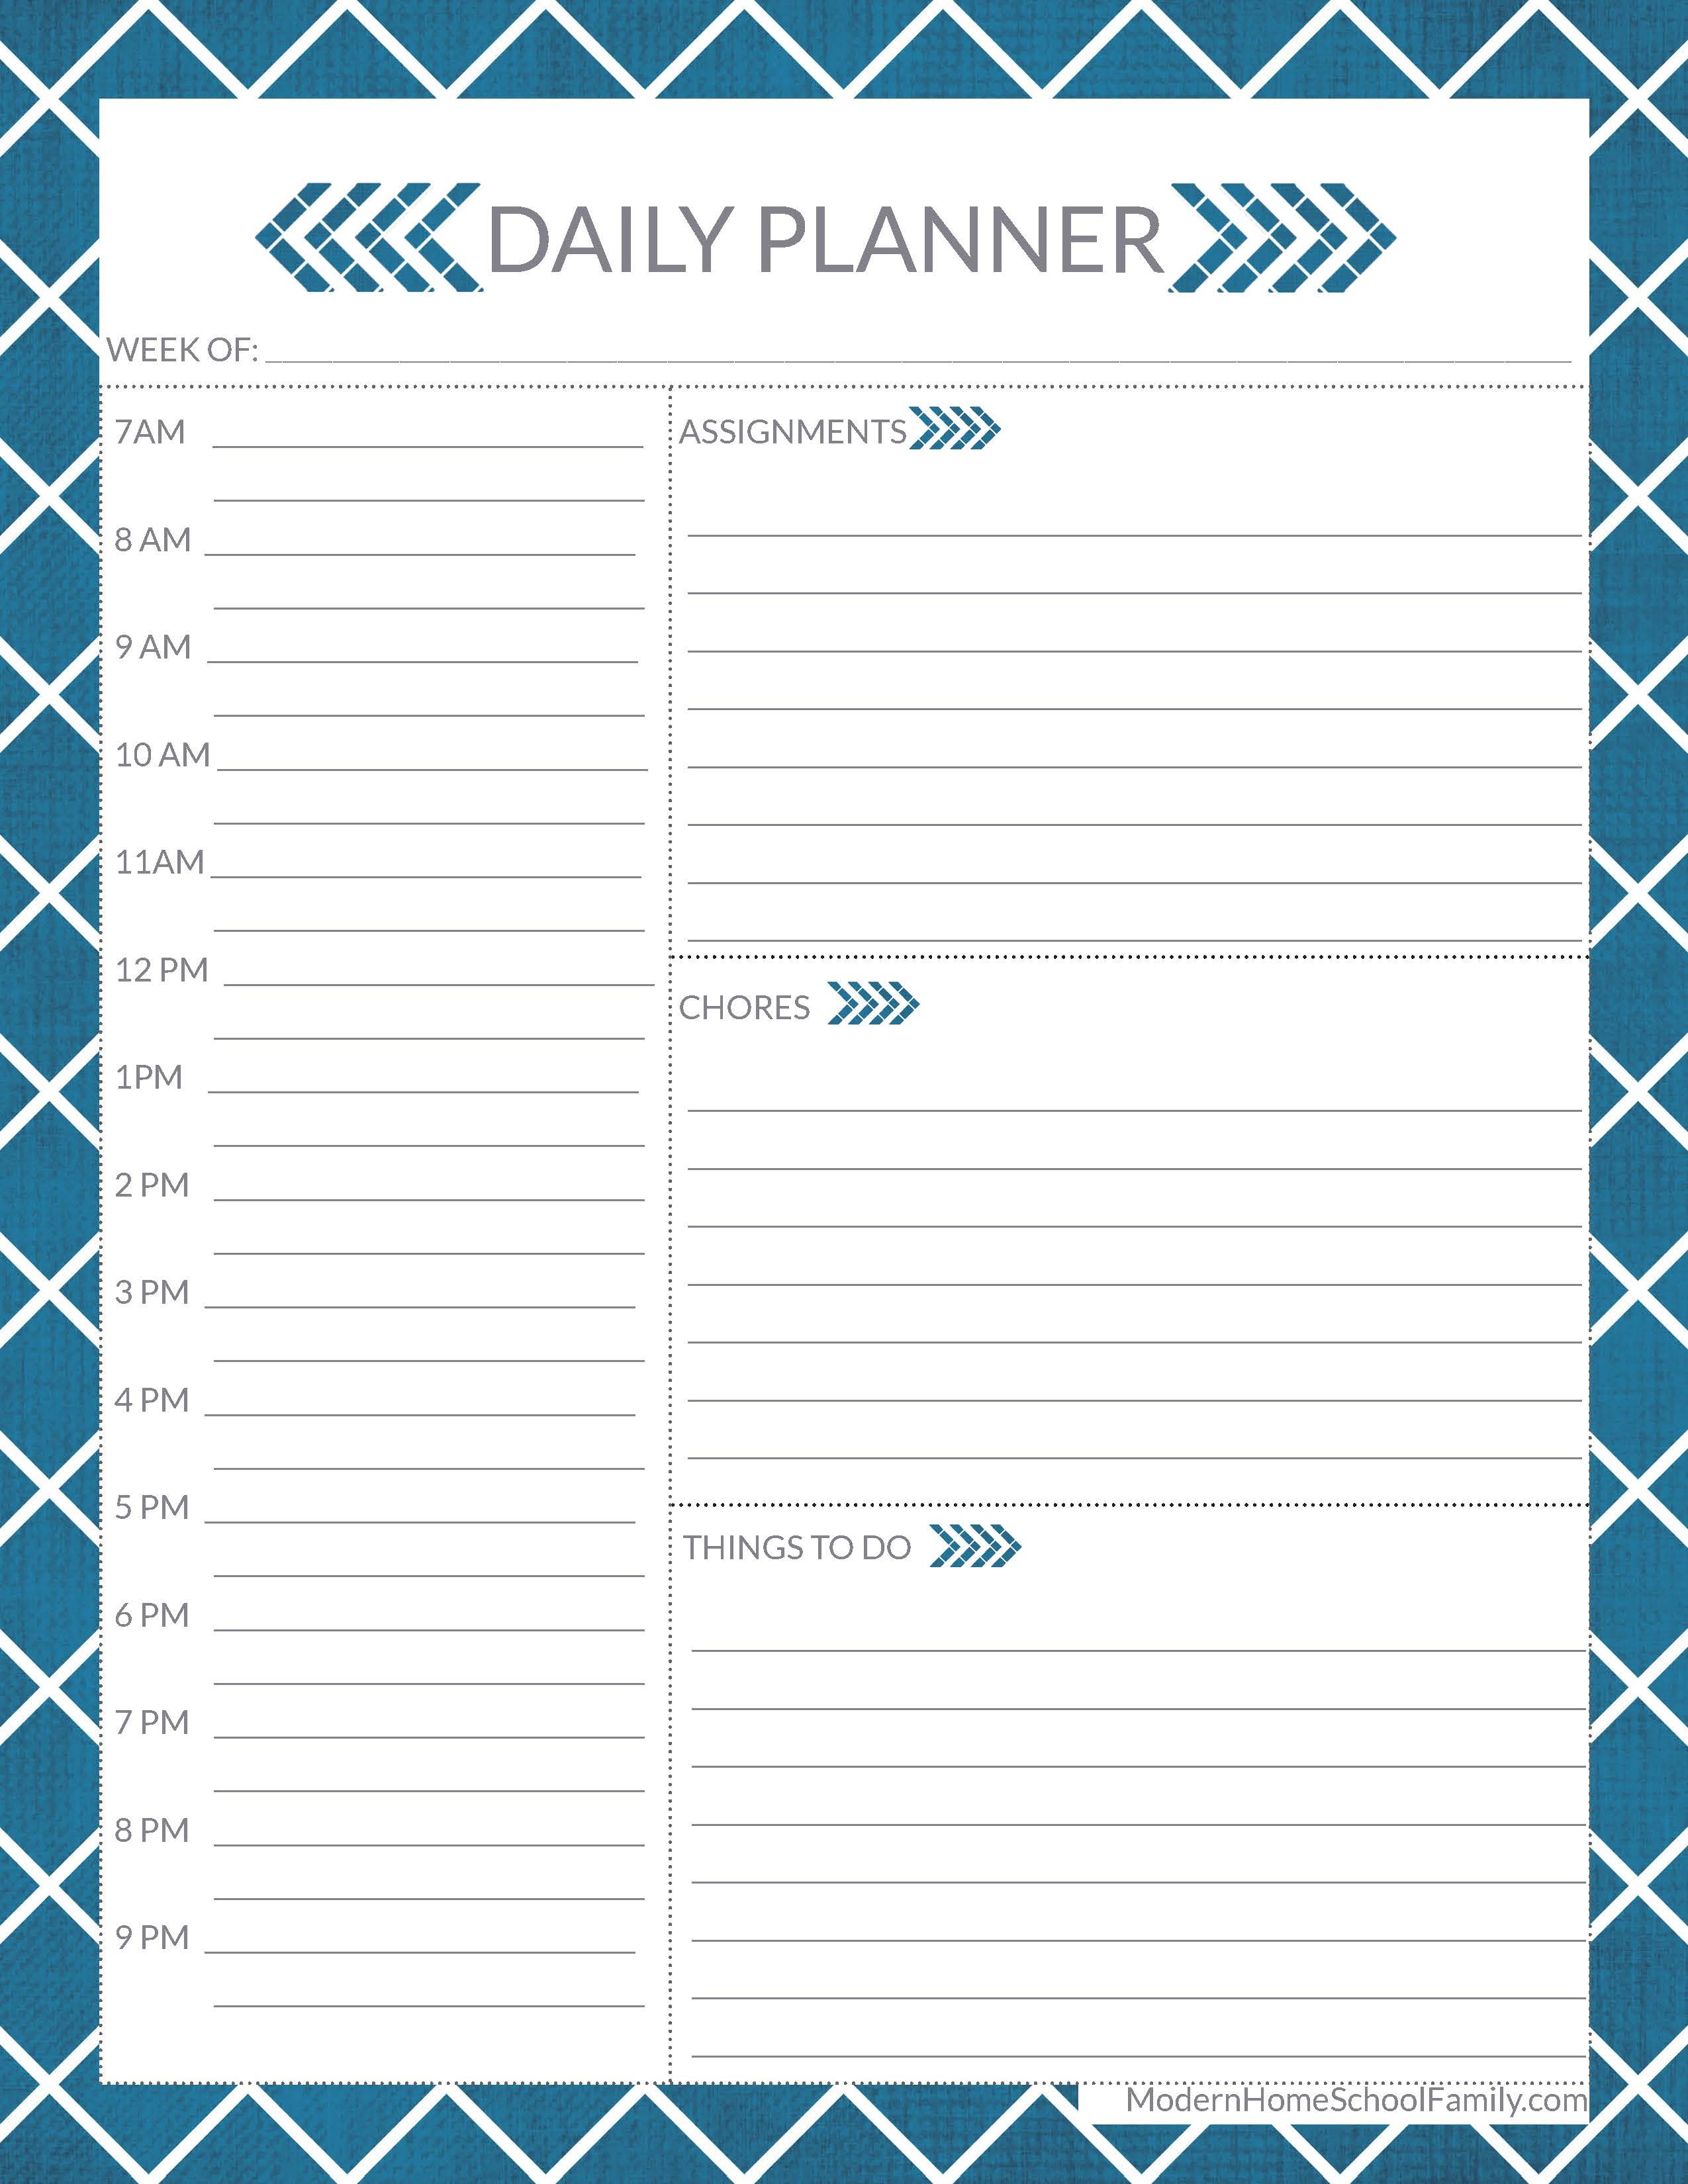 Free Homeschool Planner For High School Page - Modern Homeschool Family - Free Printable Worksheets For Highschool Students